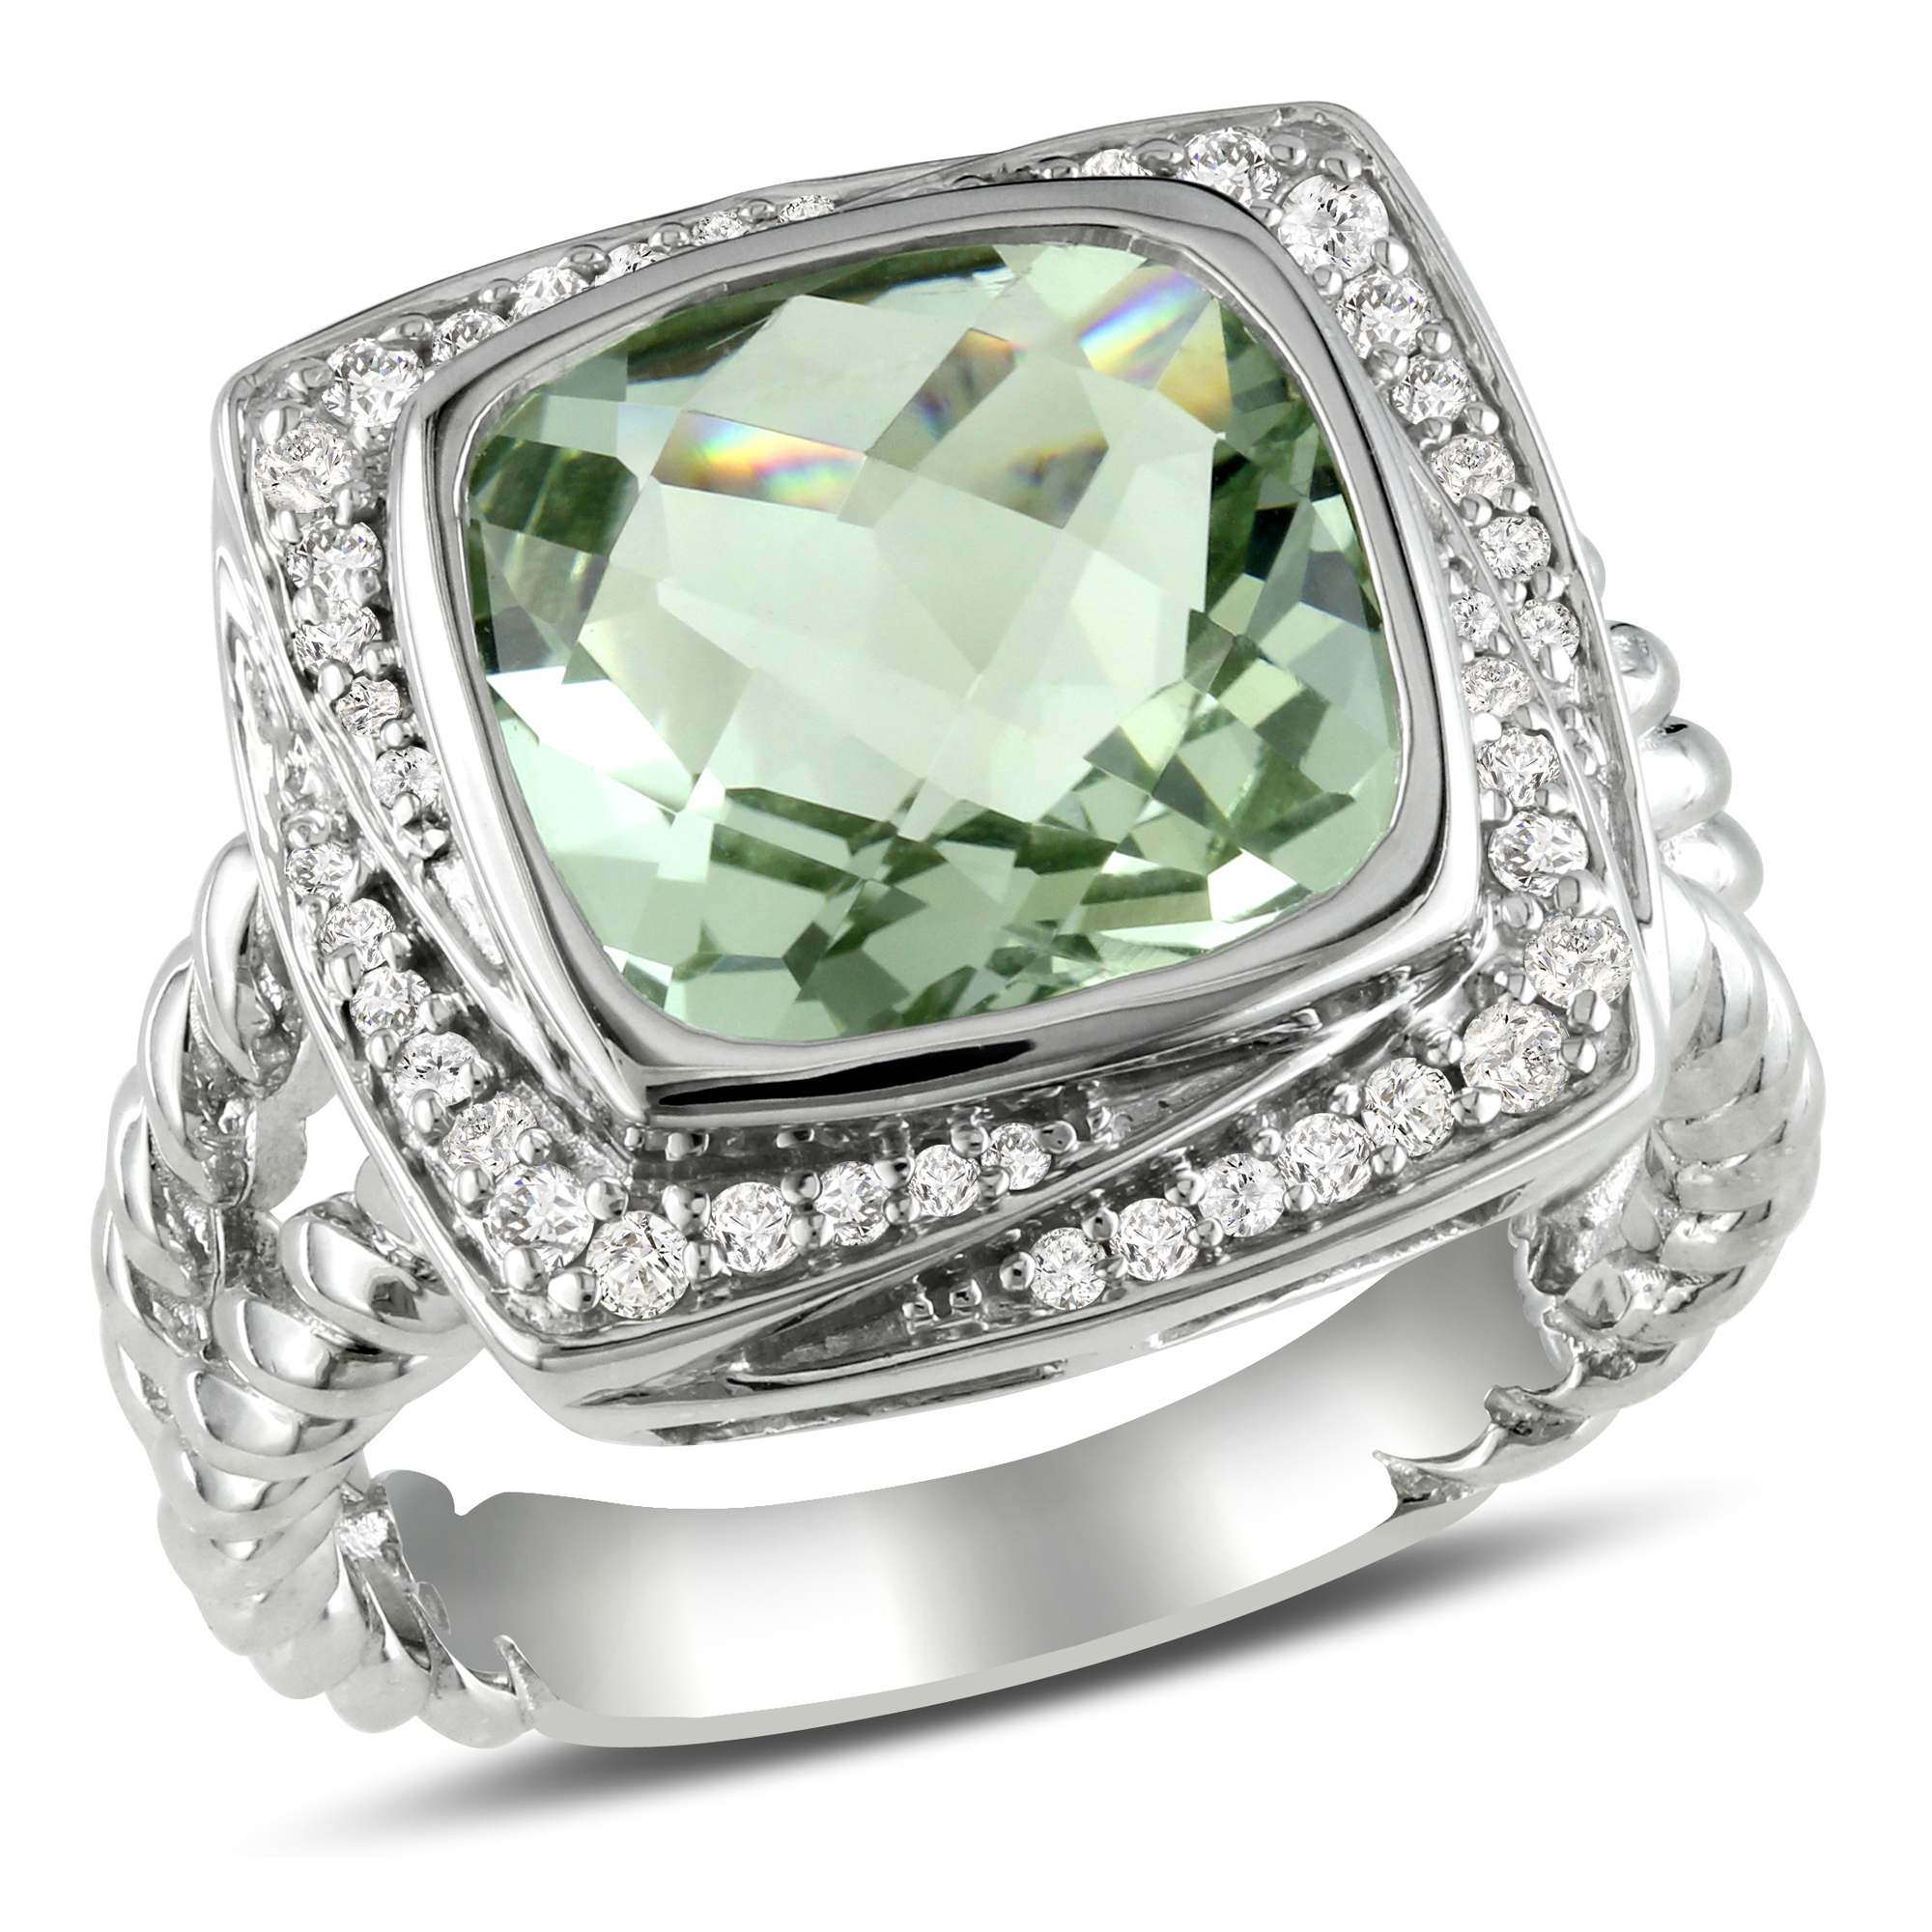 1/4 Carat T.W. Diamond and 4 Carat T.G.W. Green Amethyst Fashion Ring in Sterling Silver GH I3